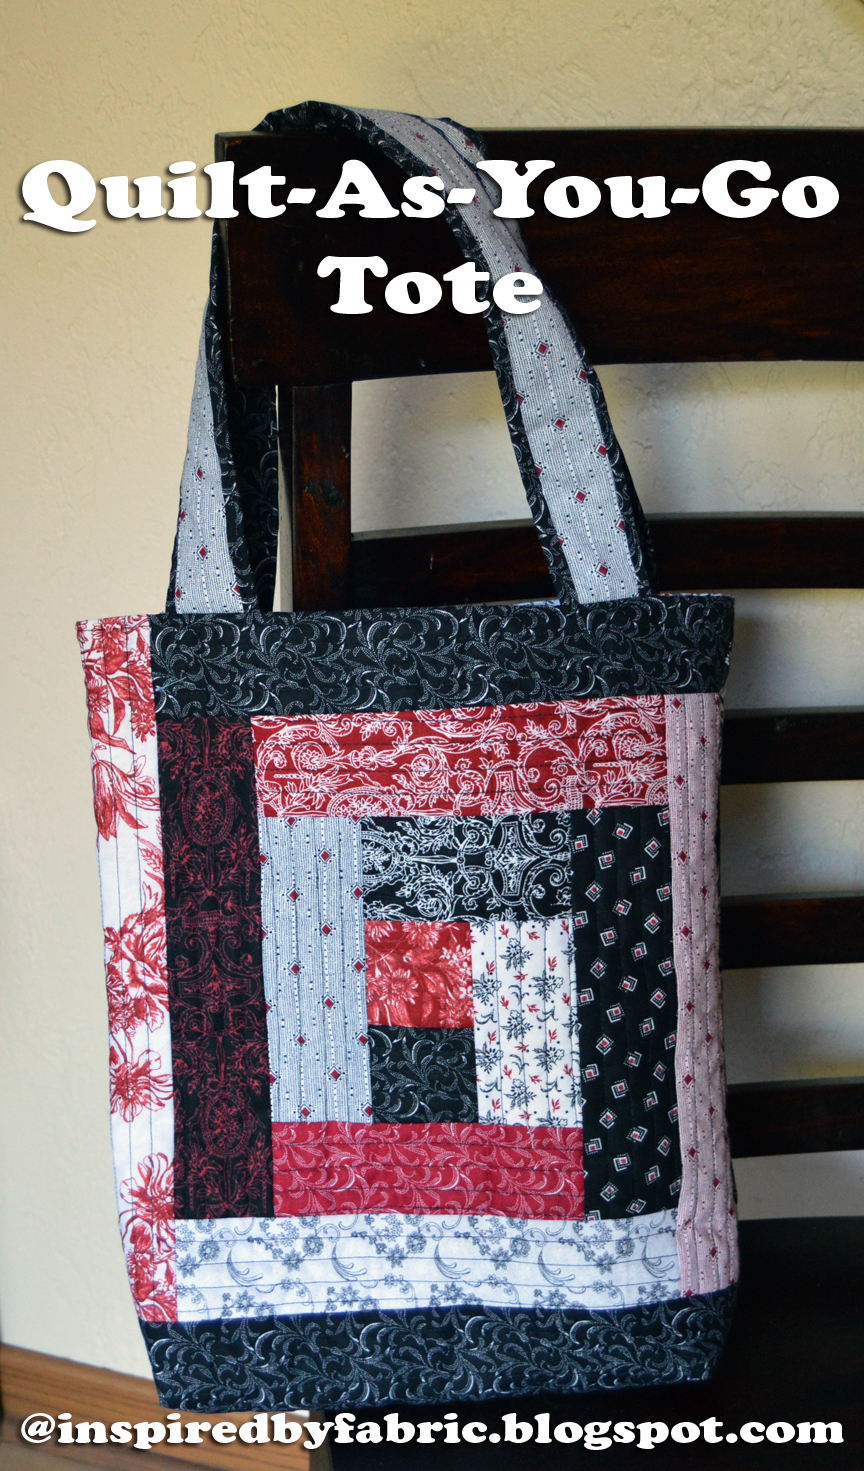 Inspired by Fabric: Summer of Sewing: Quilt-As-You-Go Tote